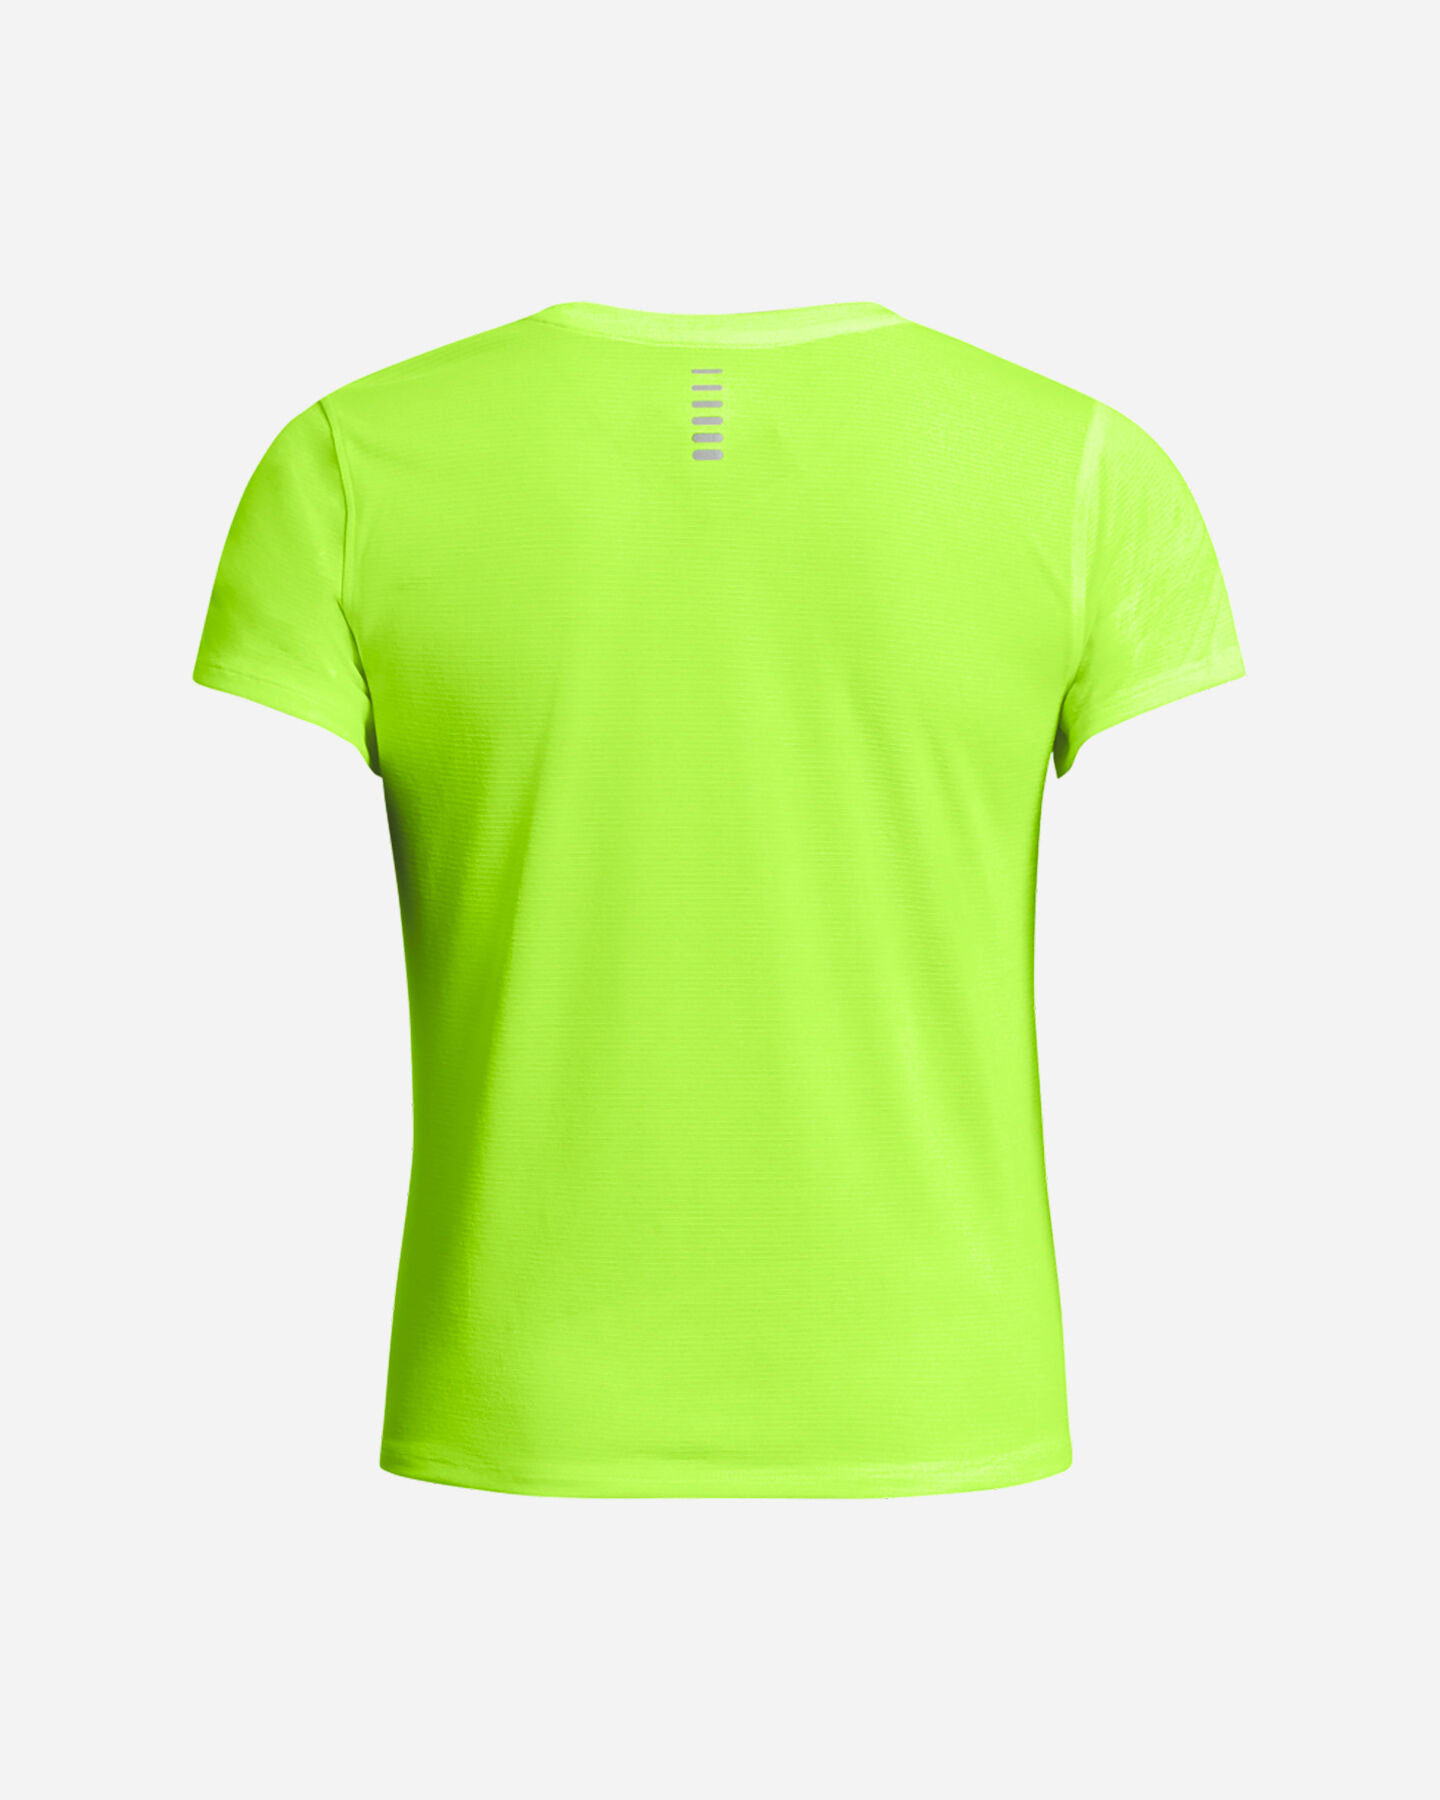  T-Shirt running UNDER ARMOUR STREAKER W S5641393|0731|XS scatto 1